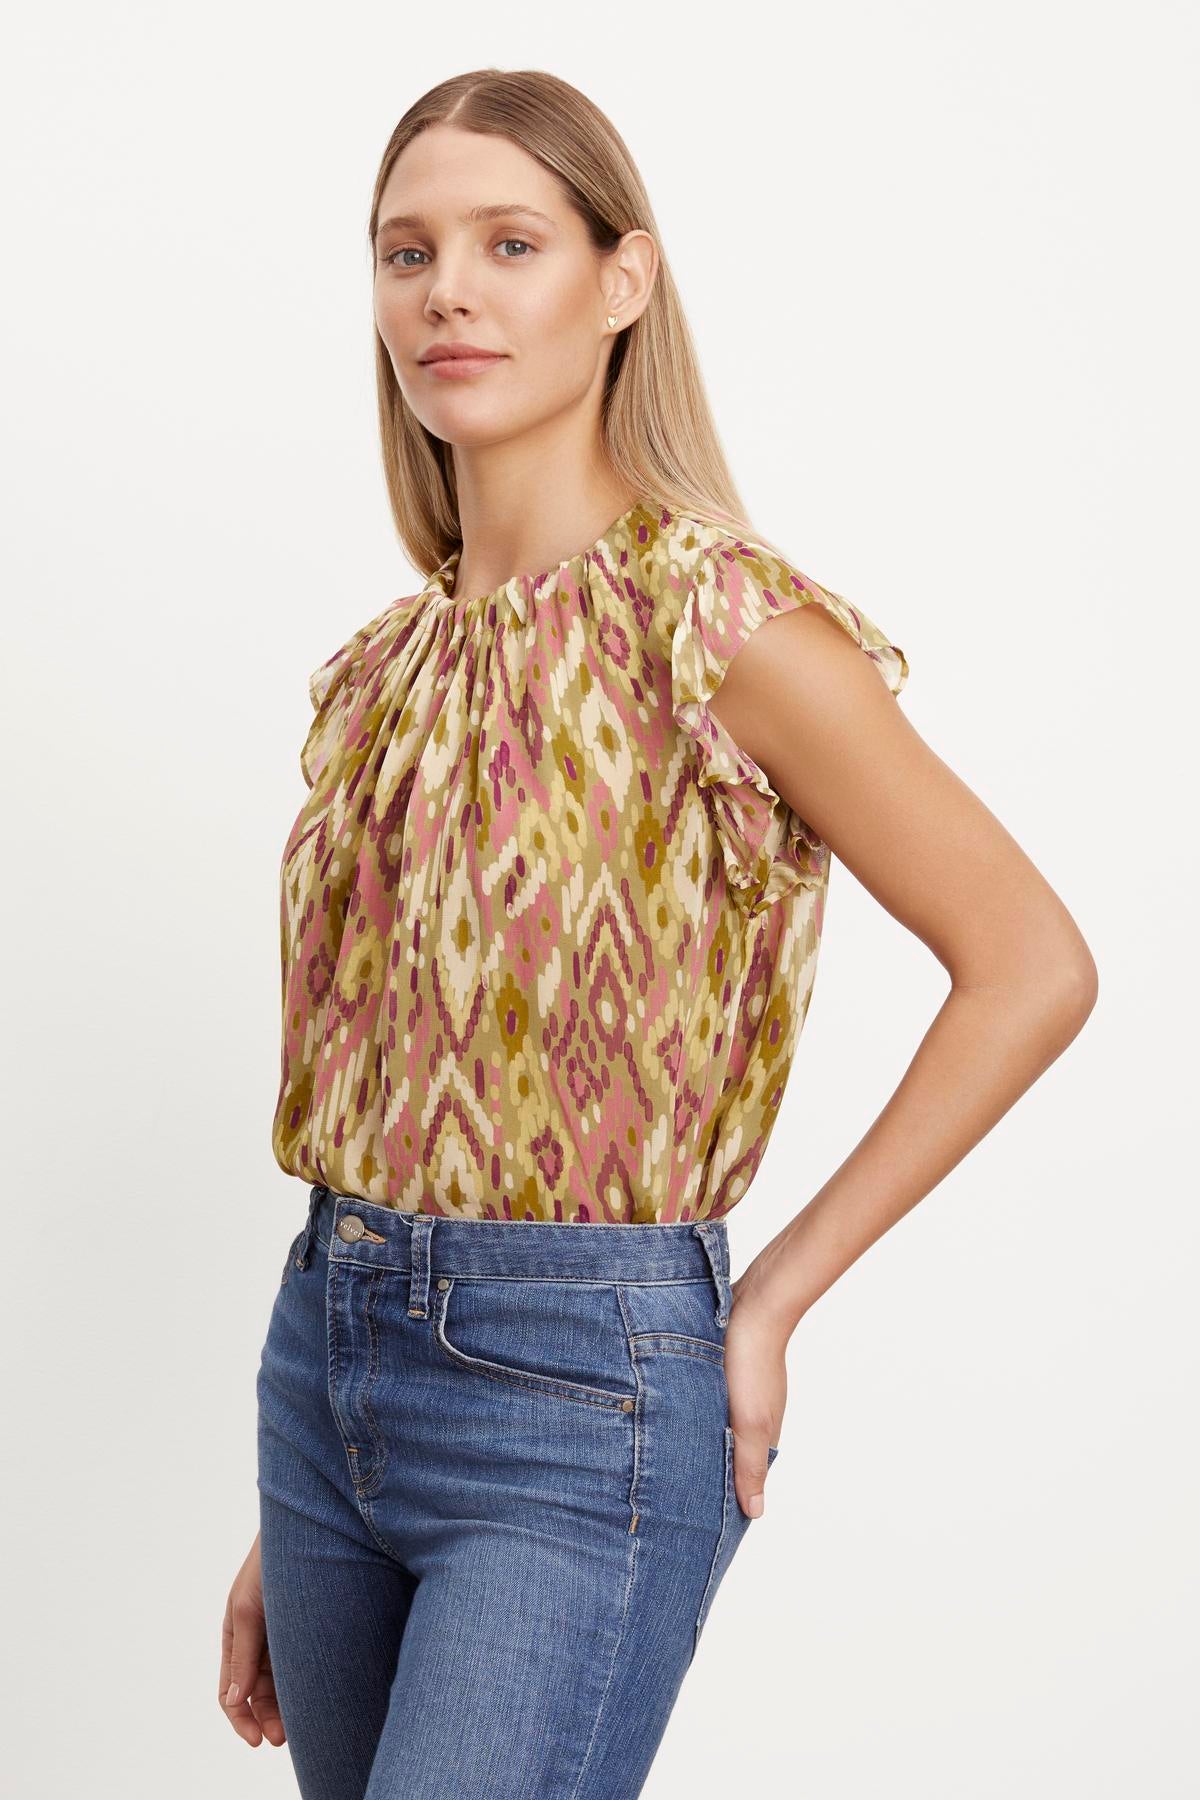   The model is wearing jeans and a Velvet by Graham & Spencer ADARA PRINTED FLUTTER SLEEVE TOP. 